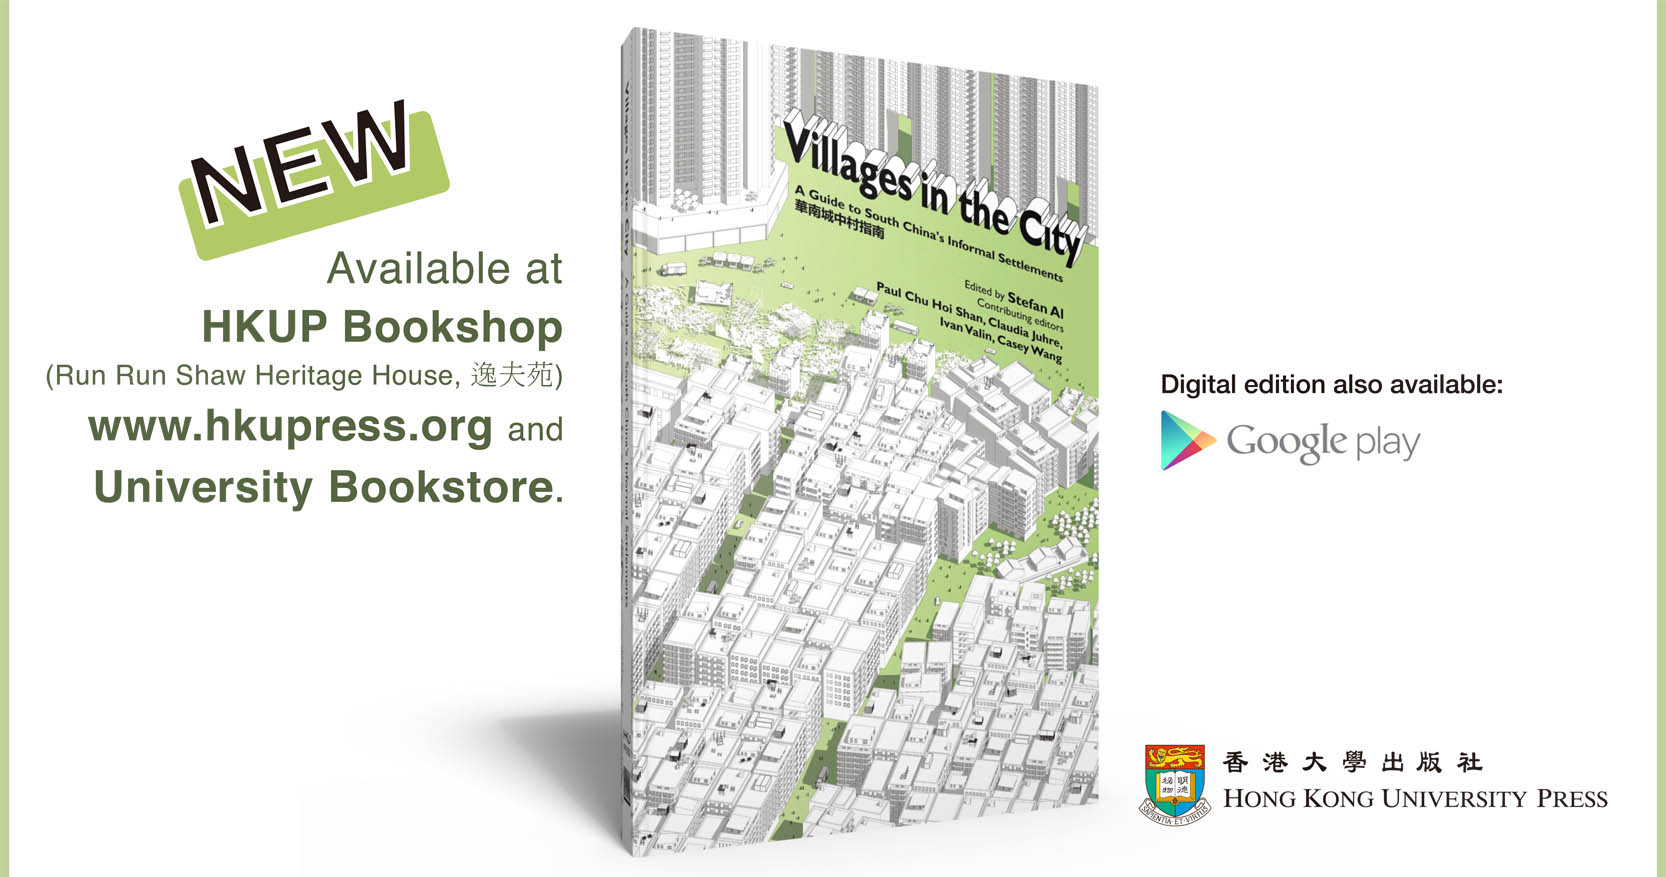 New Book: Villages in the City